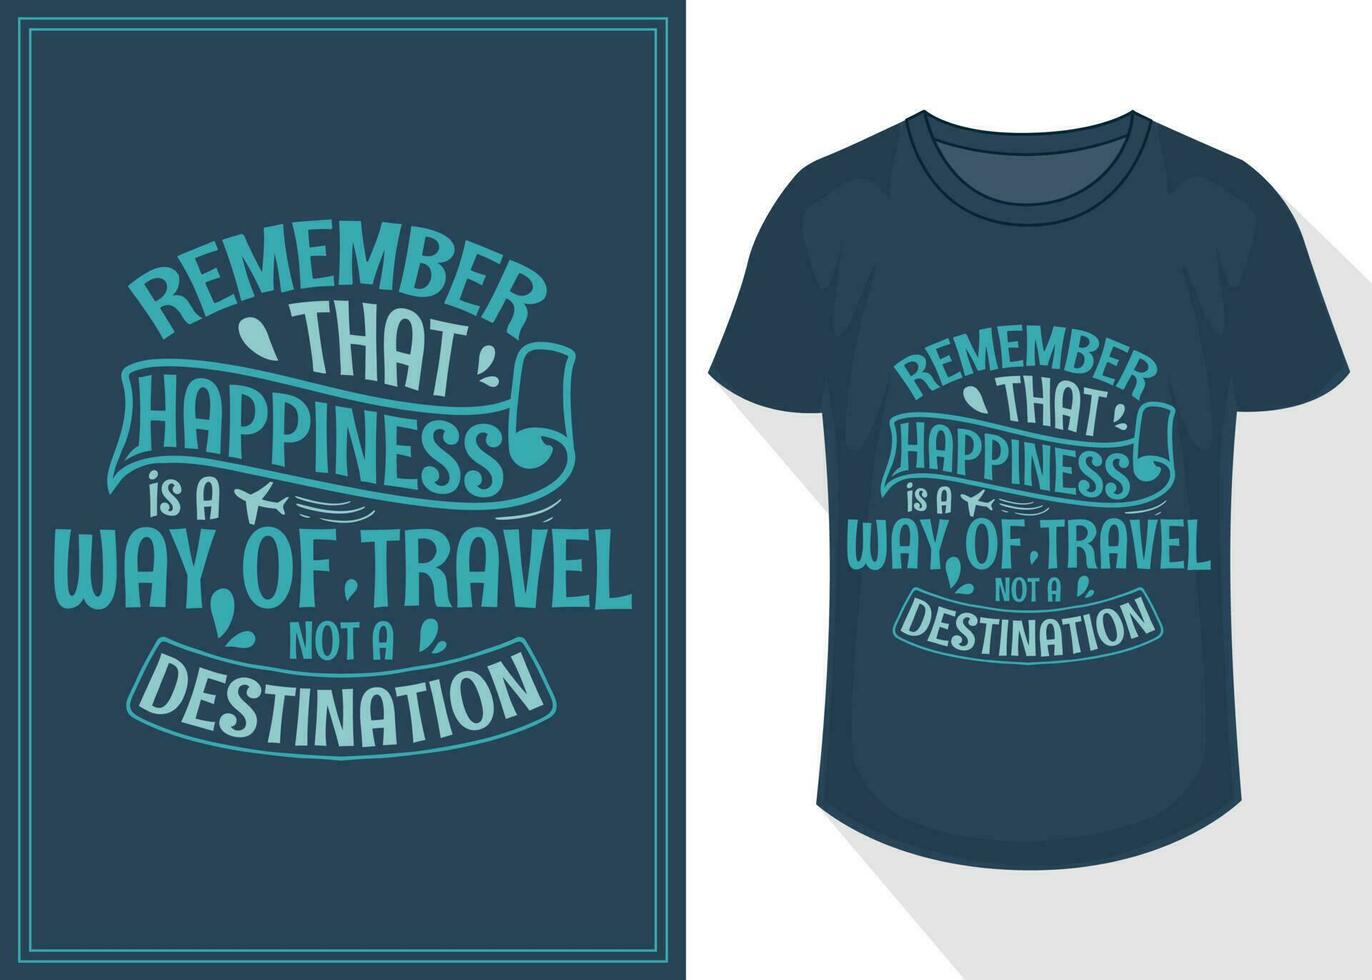 remember that happiness is a way of travel not a destination quotes typography lettering for t shirt design. travel t-shirt design vector